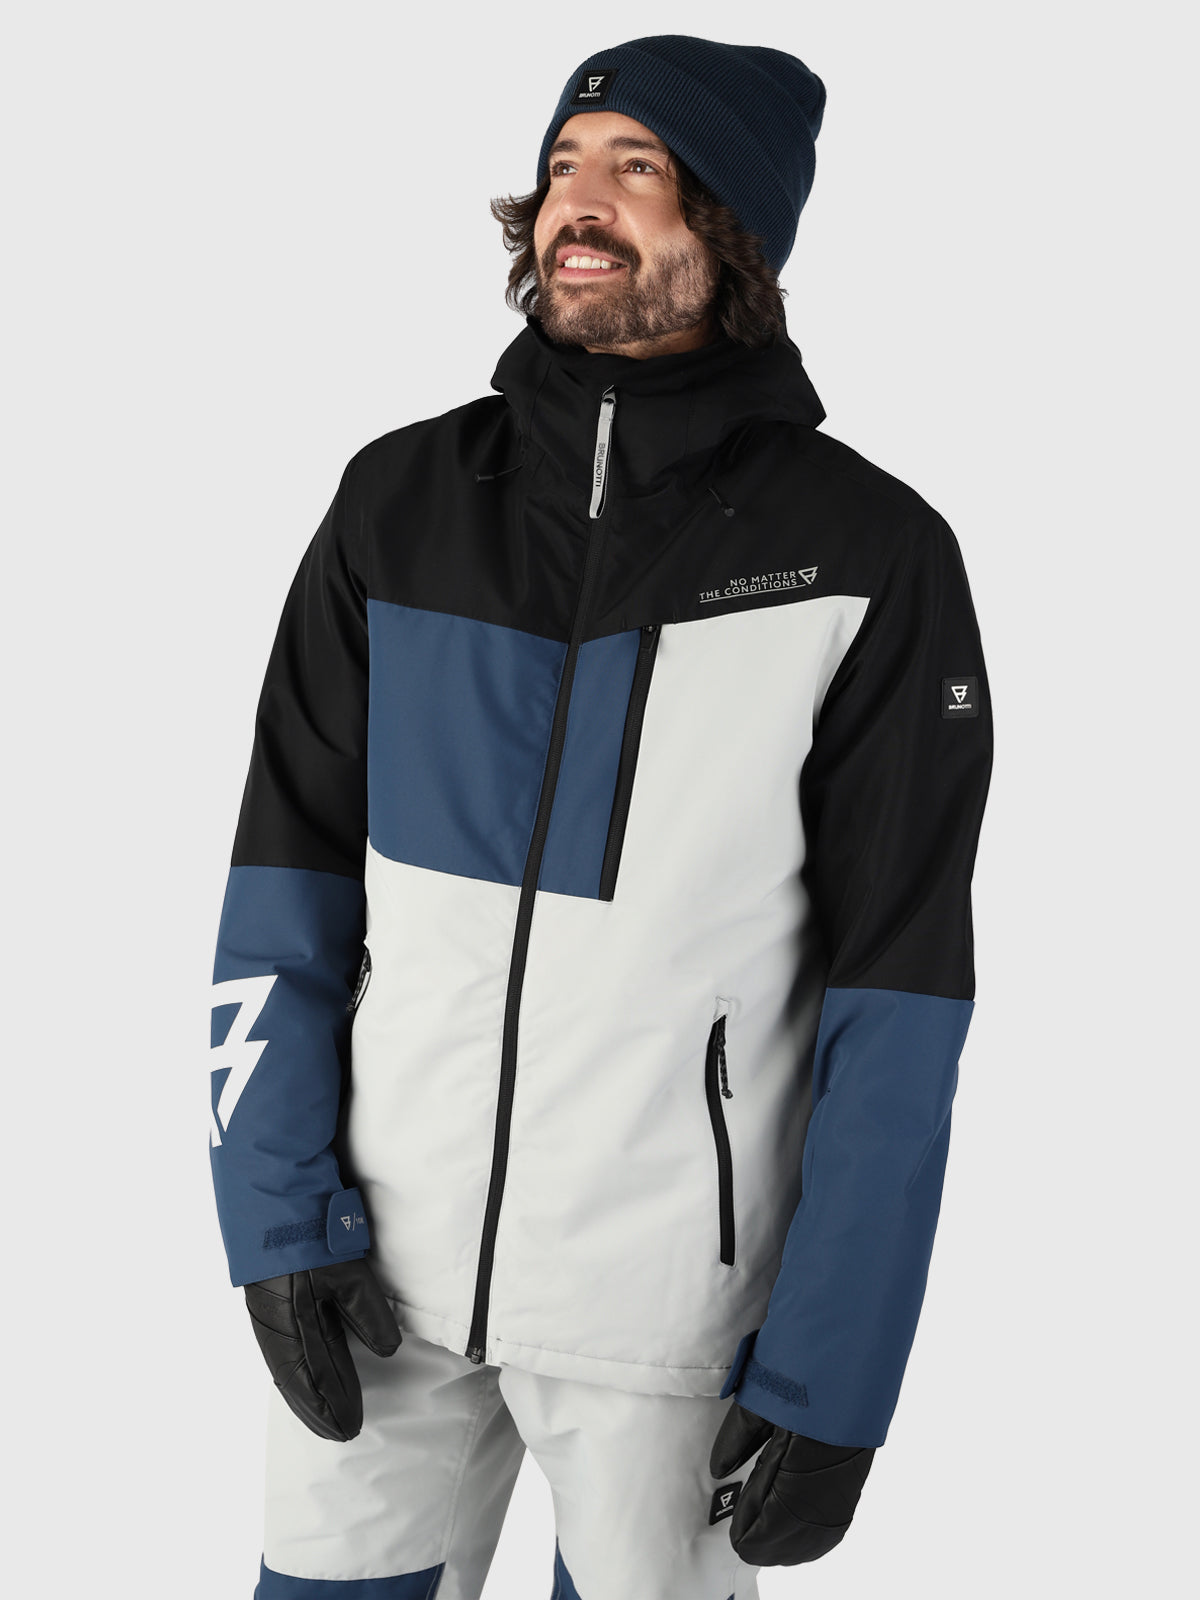 Ski Jackets for and performance and Men, High Women, Brunotti Snow Jackets: Snowboard Kids